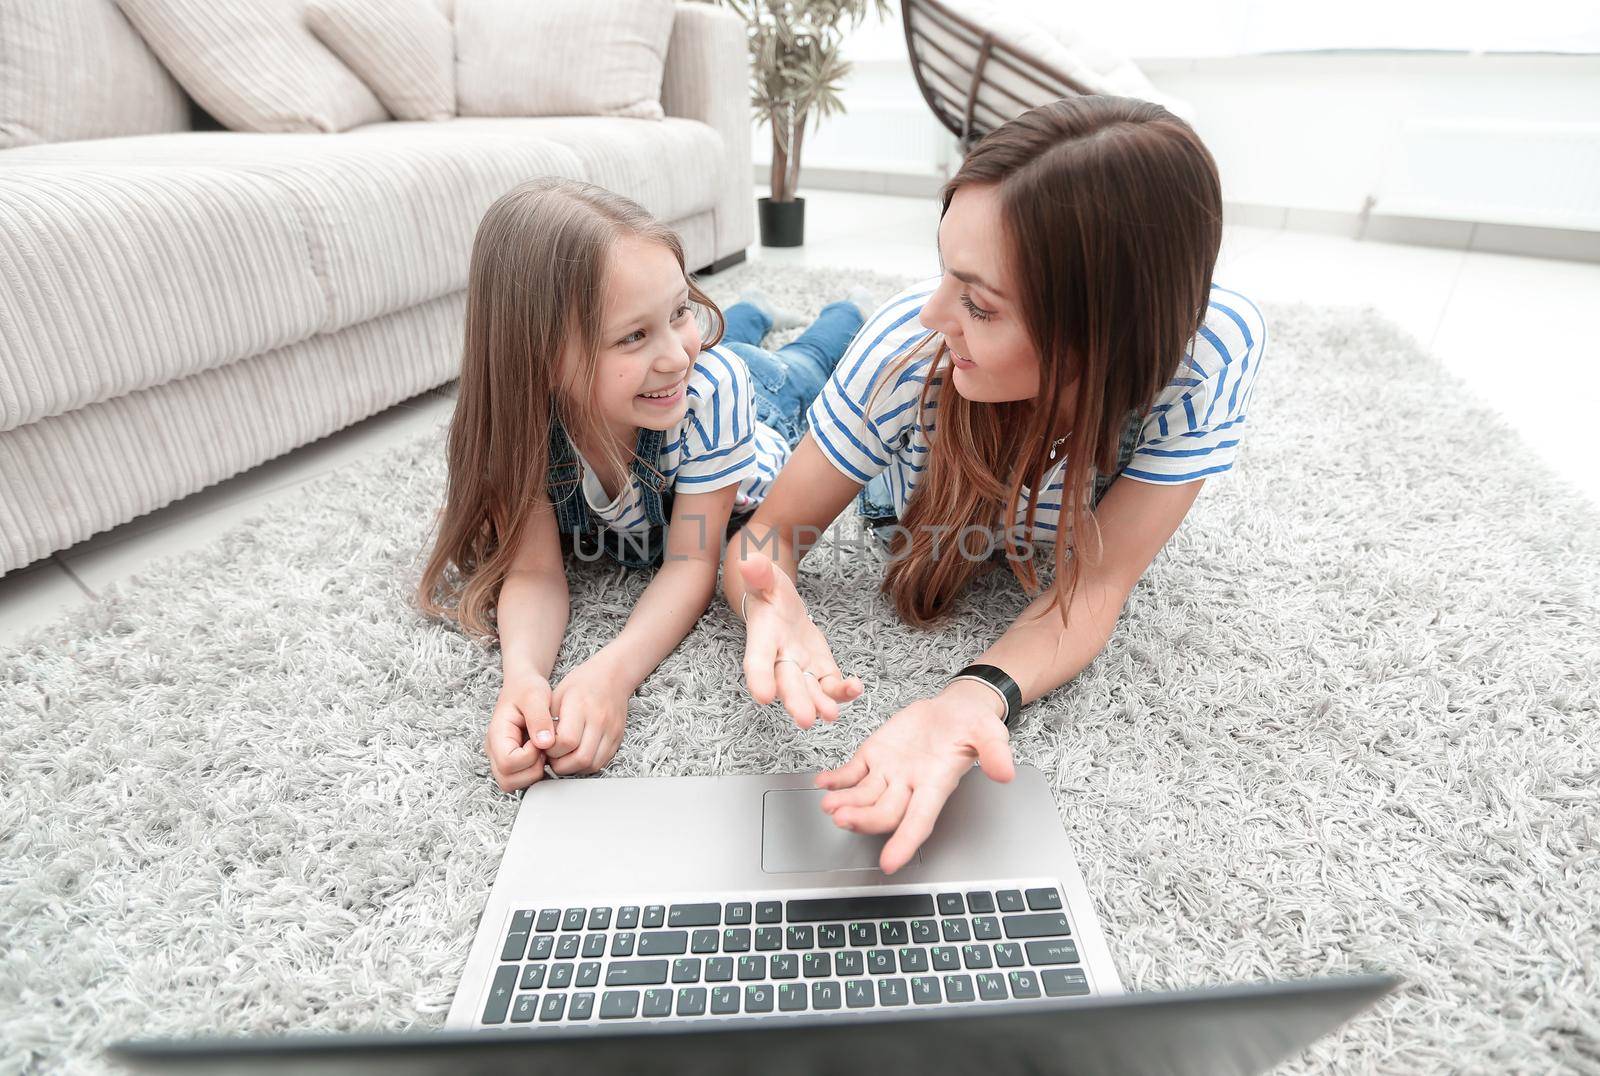 mom and daughter lying on the carpet and using a laptop by asdf